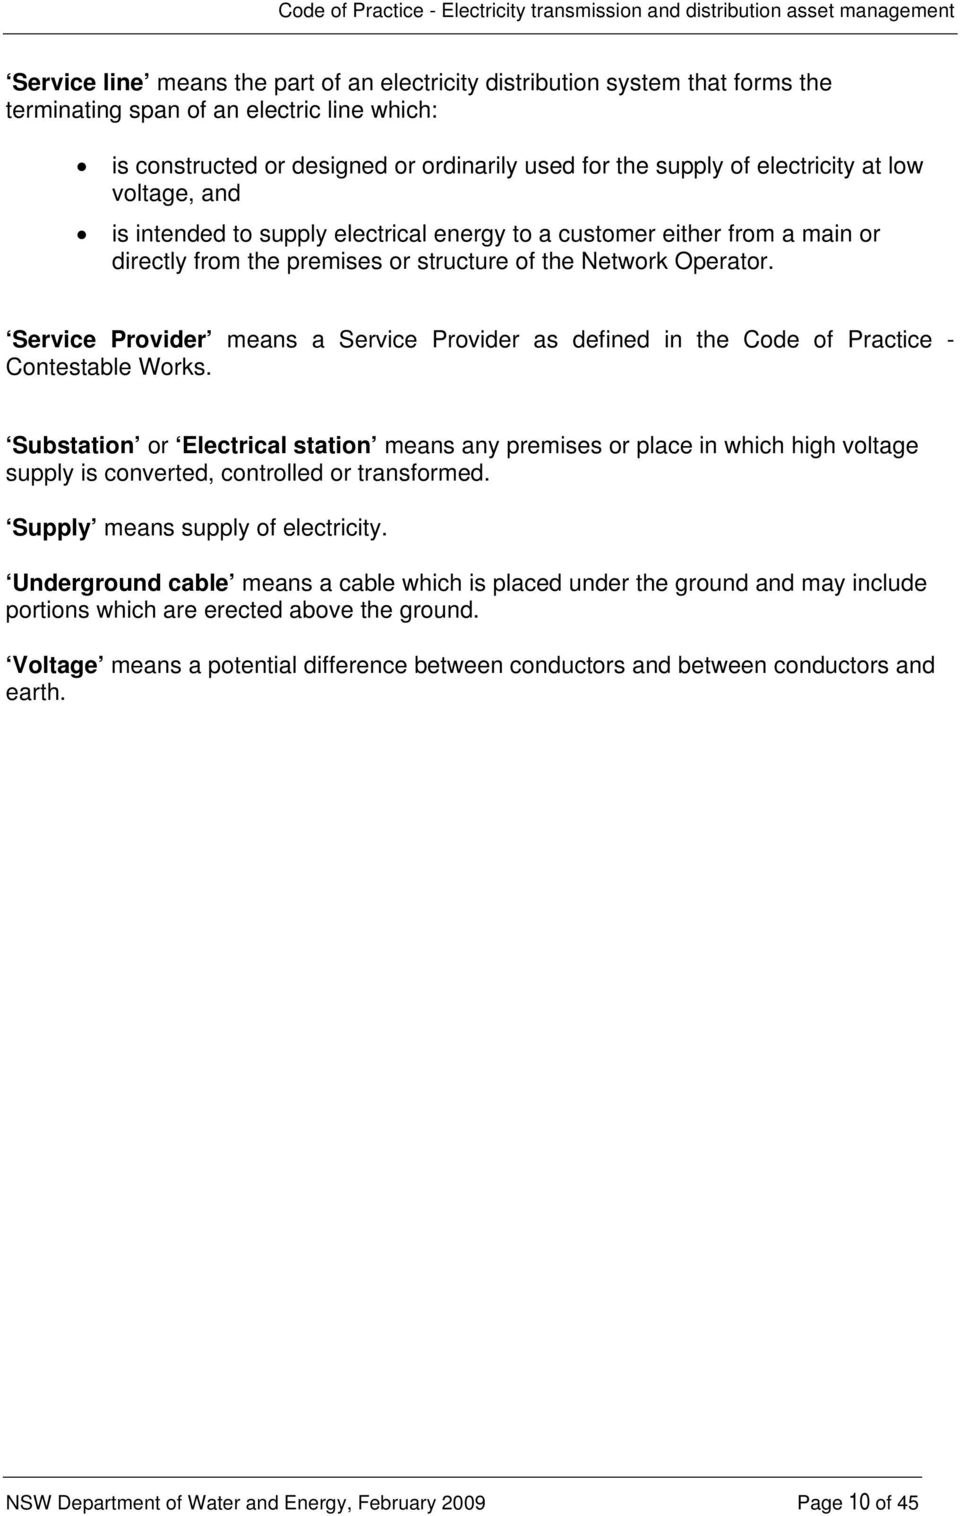 Service Provider means a Service Provider as defined in the Code of Practice - Contestable Works.